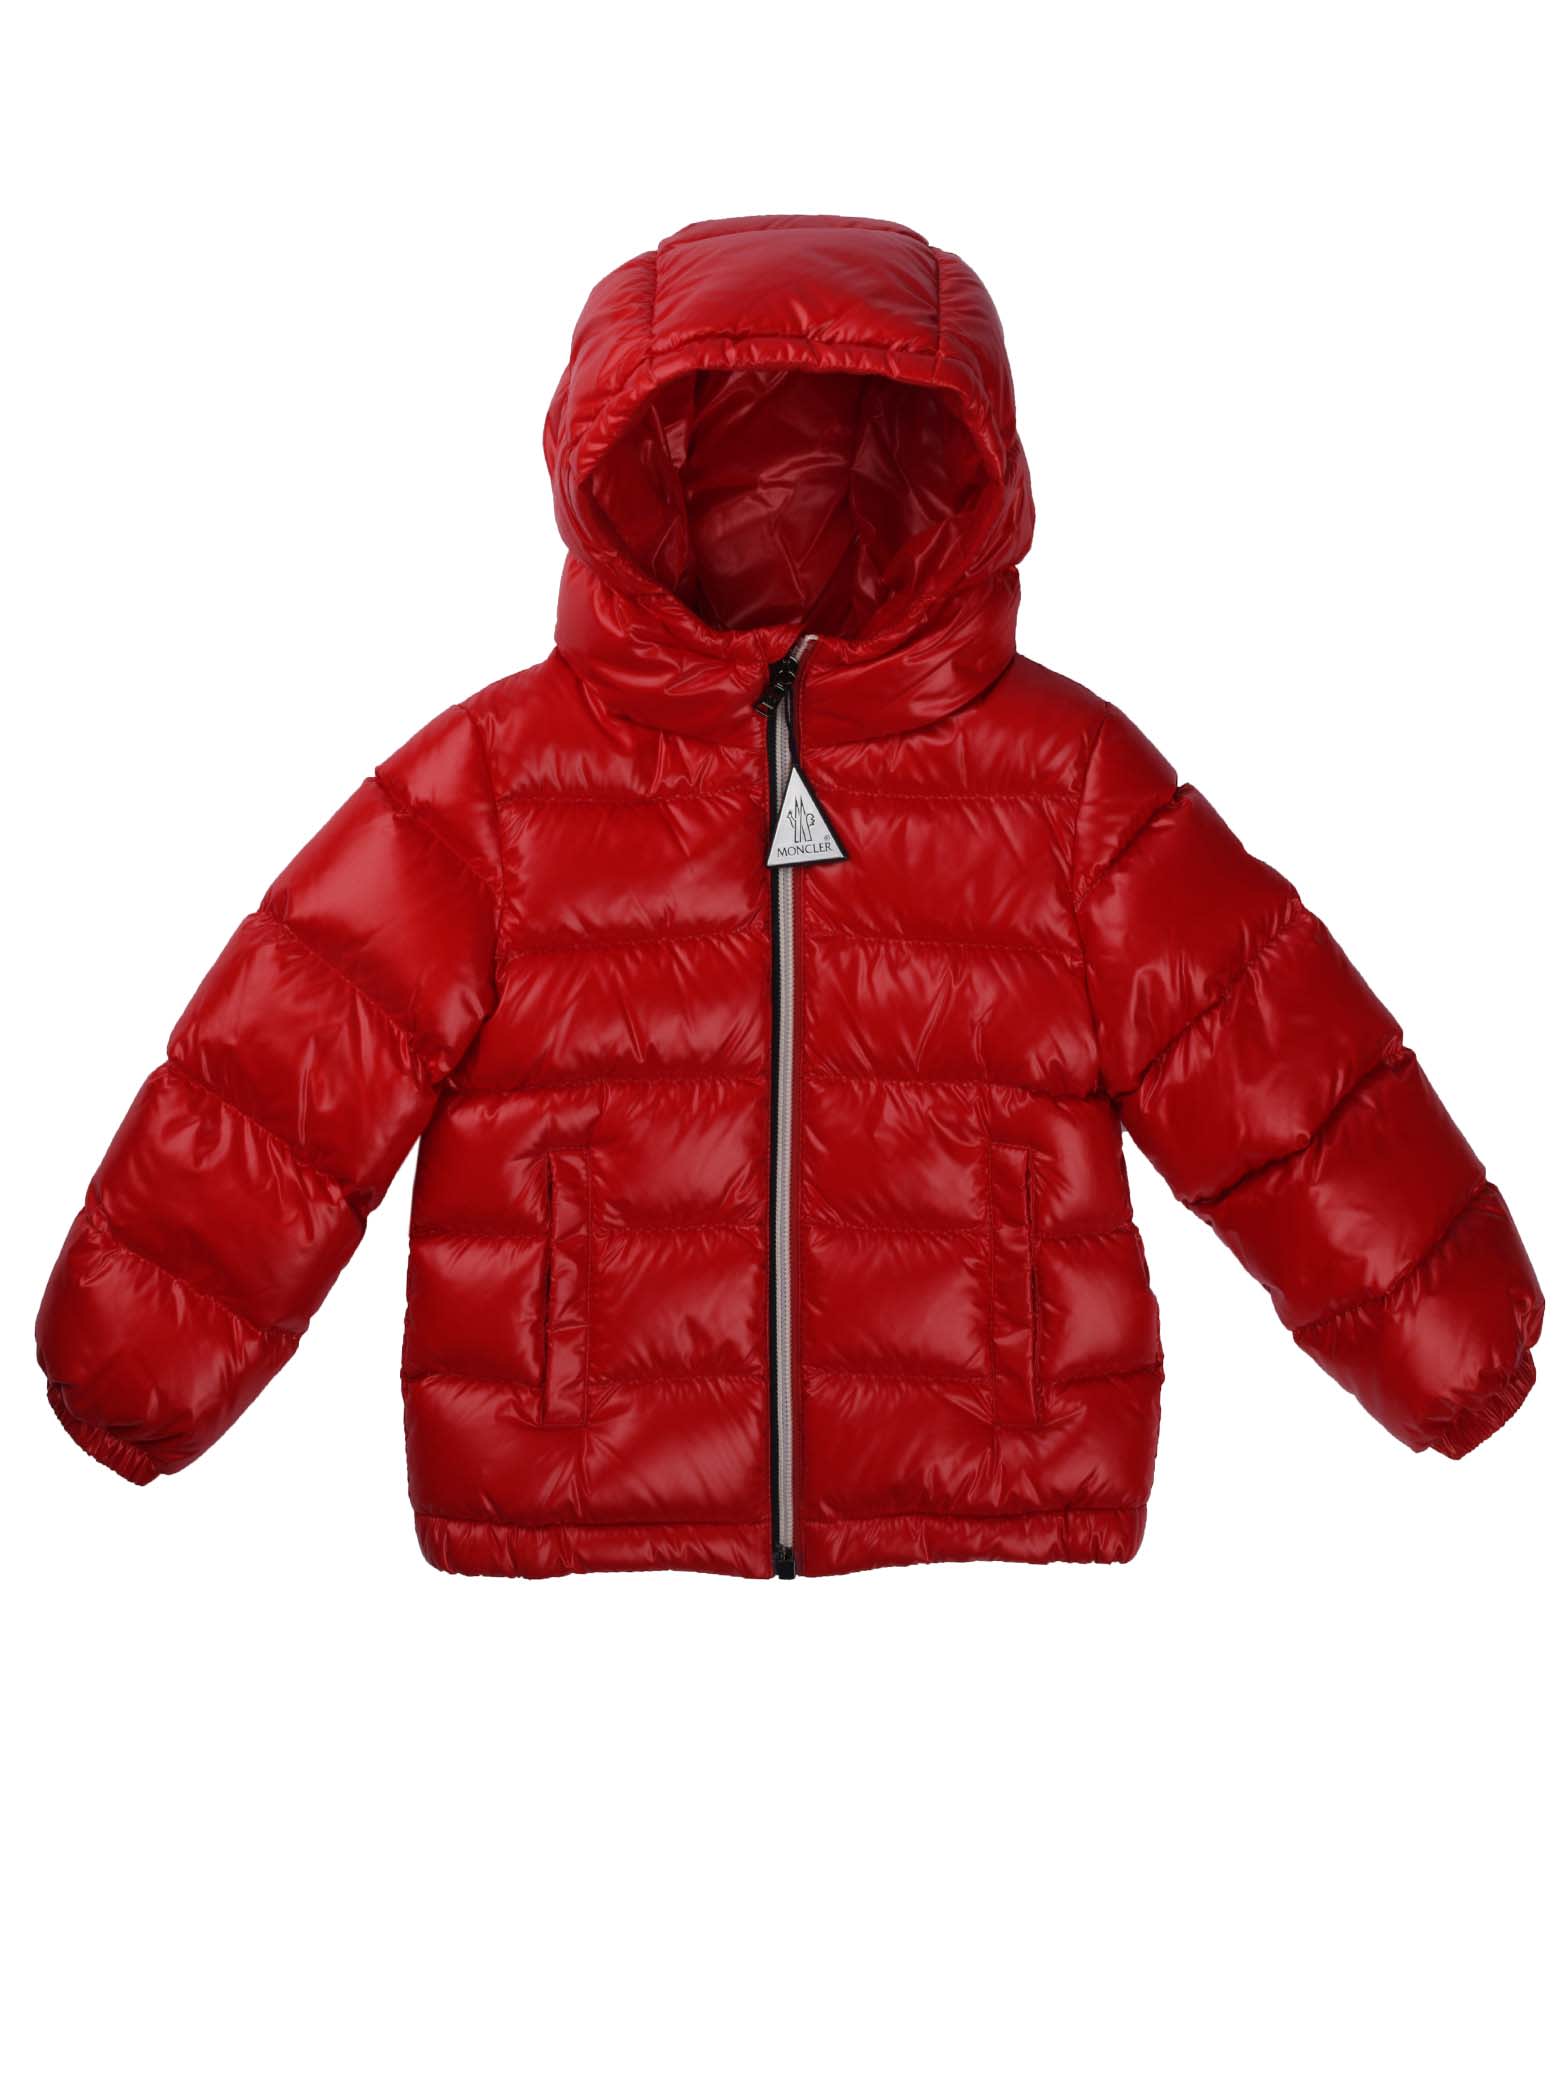 Moncler New Aubert Red Jacket With Hood